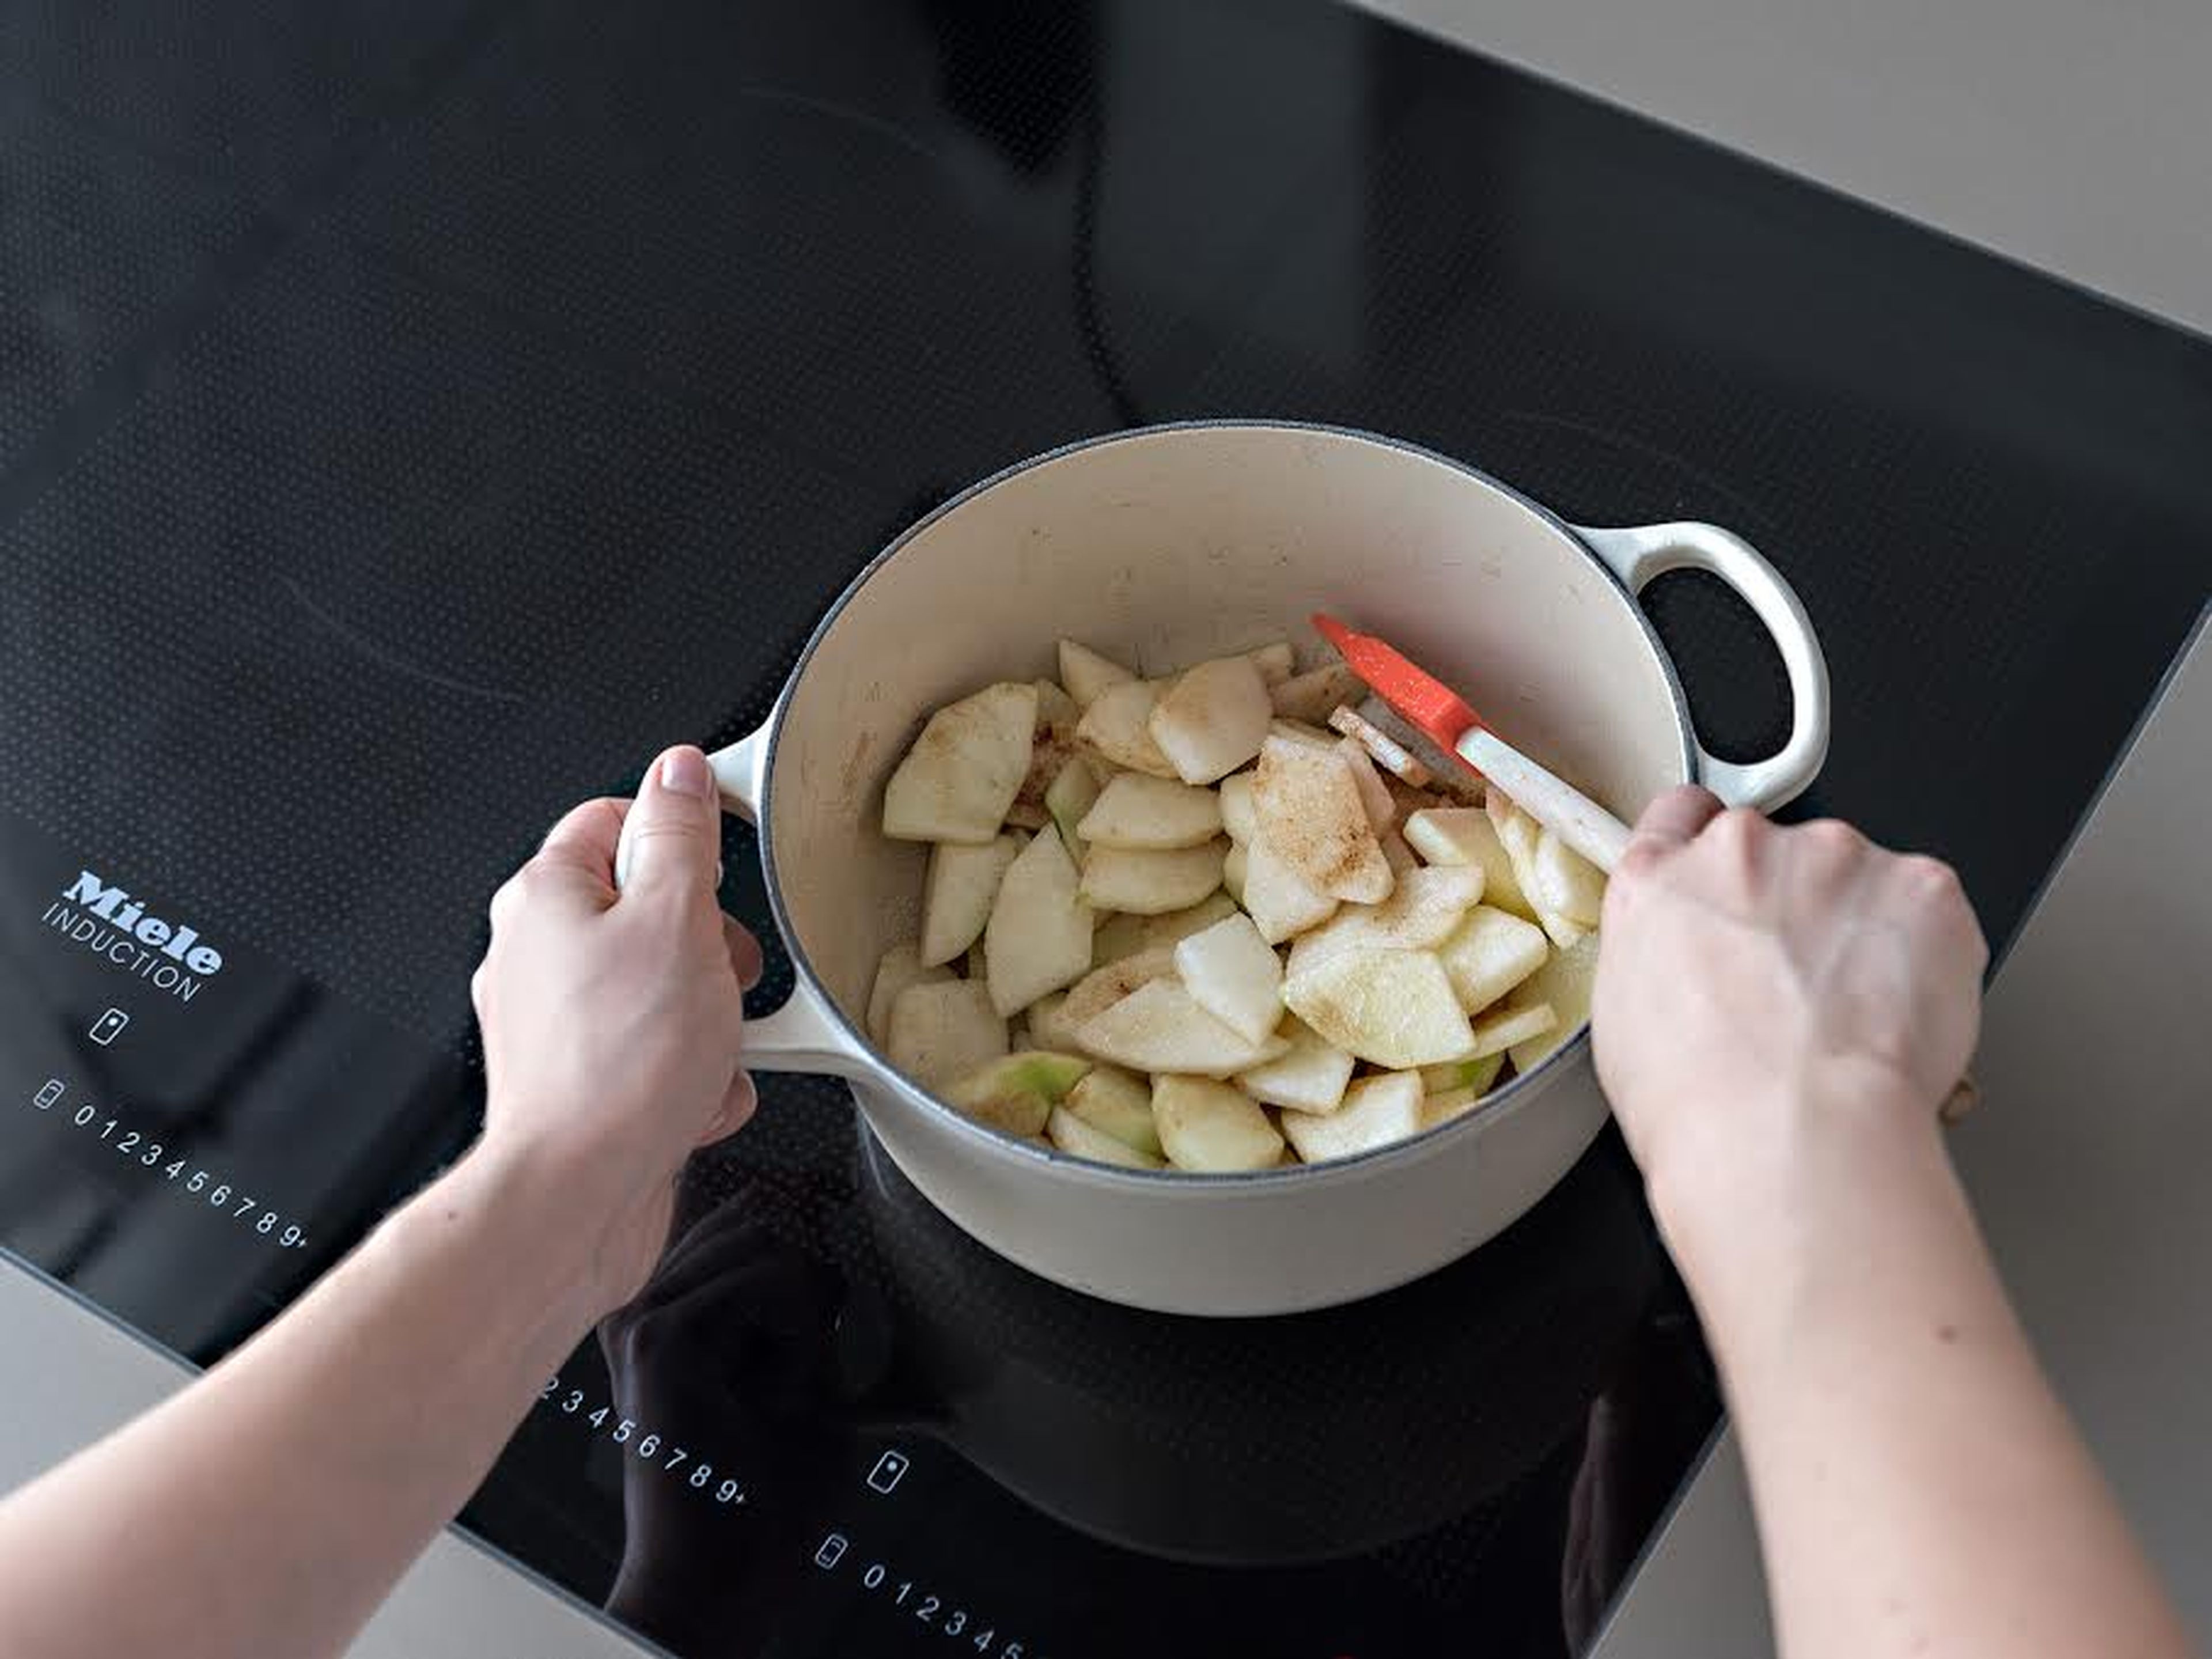 Meanwhile, peel apples, core, and thinly slice. Transfer to a saucepan with lemon juice, remaining sugar, cinnamon, and ground ginger and cook over medium-low heat for approx. 5 min., until slightly softened. Remove from heat and set aside to cool.